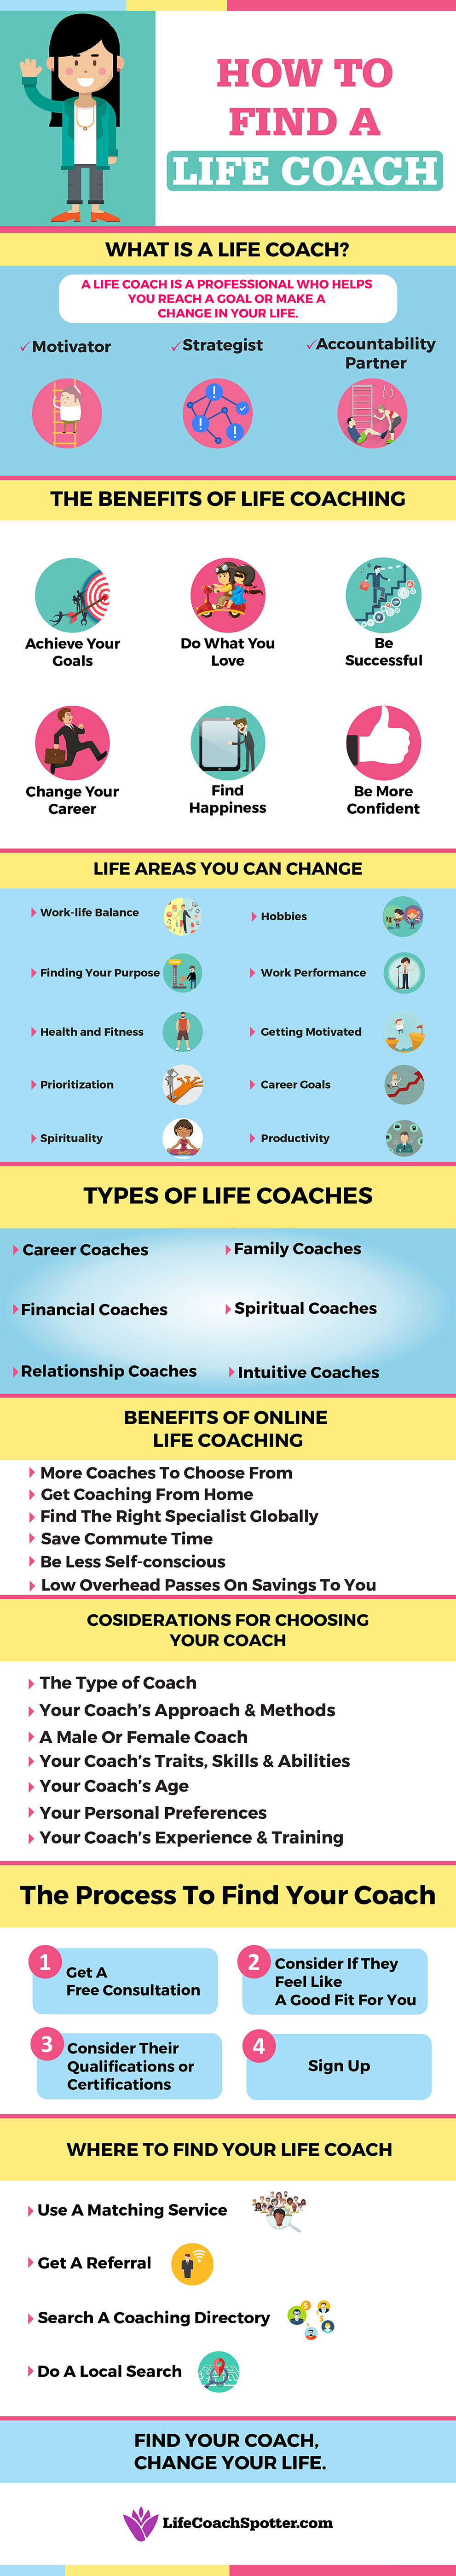 Achieving Business Success with a Coach [Infographic] - How to Find a Life Coach